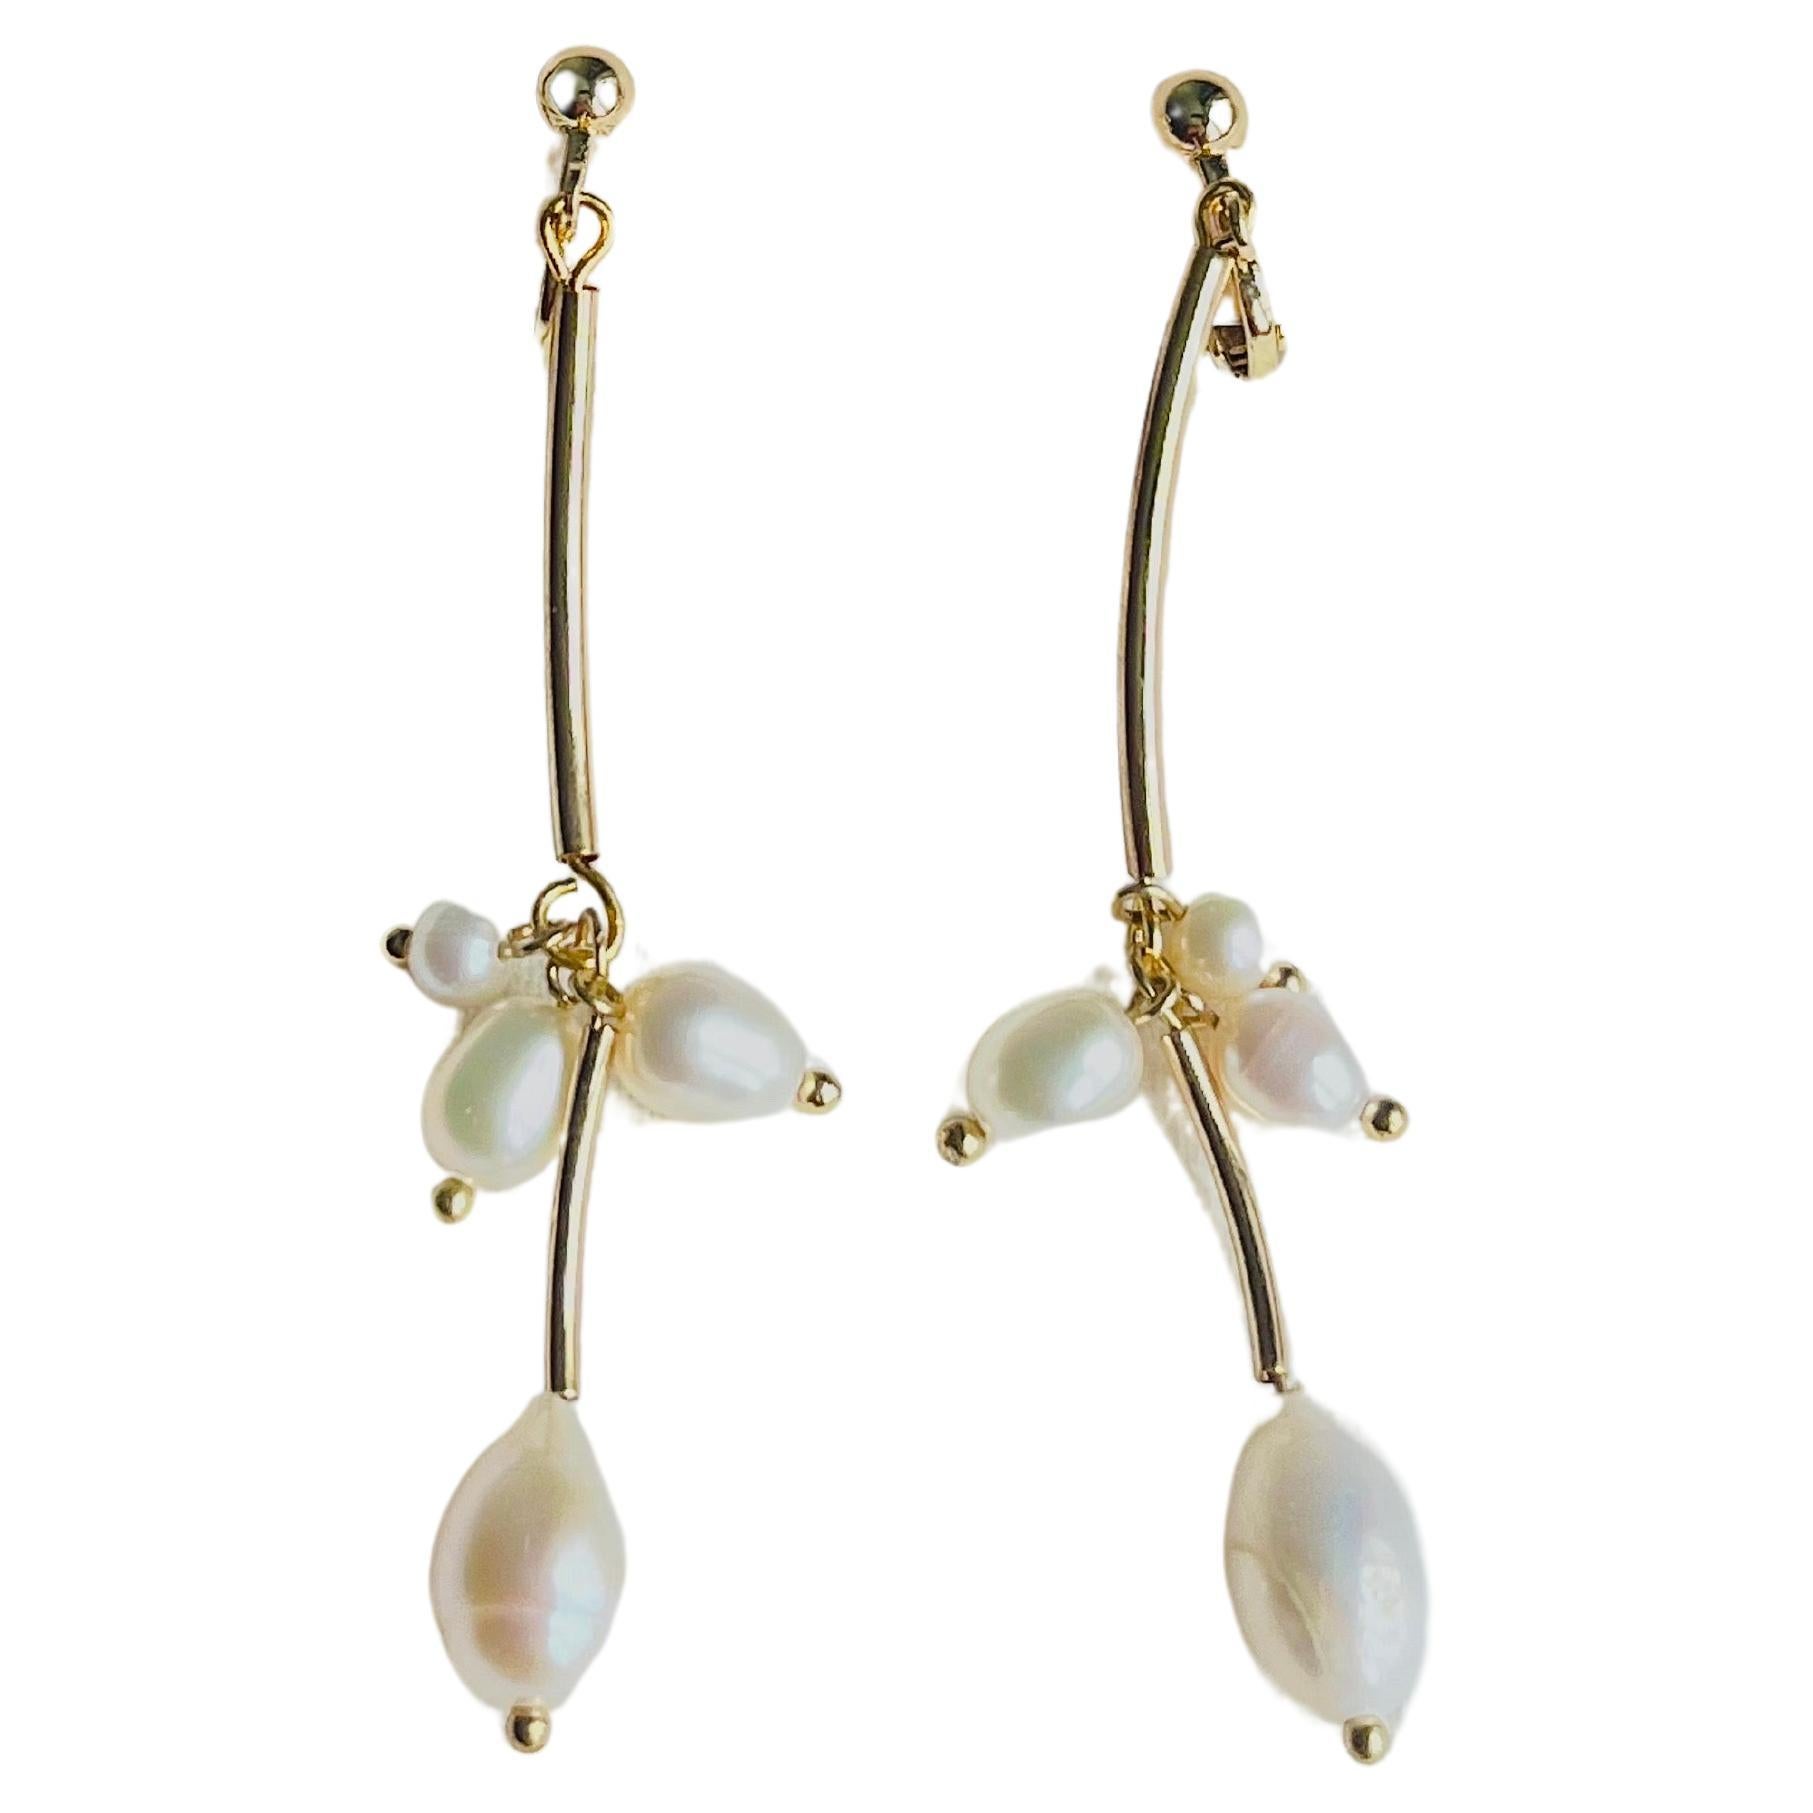 White Oval Cluster Pearls Curled Long Drop Dangle Elegant Gold Pierced Earrings For Sale